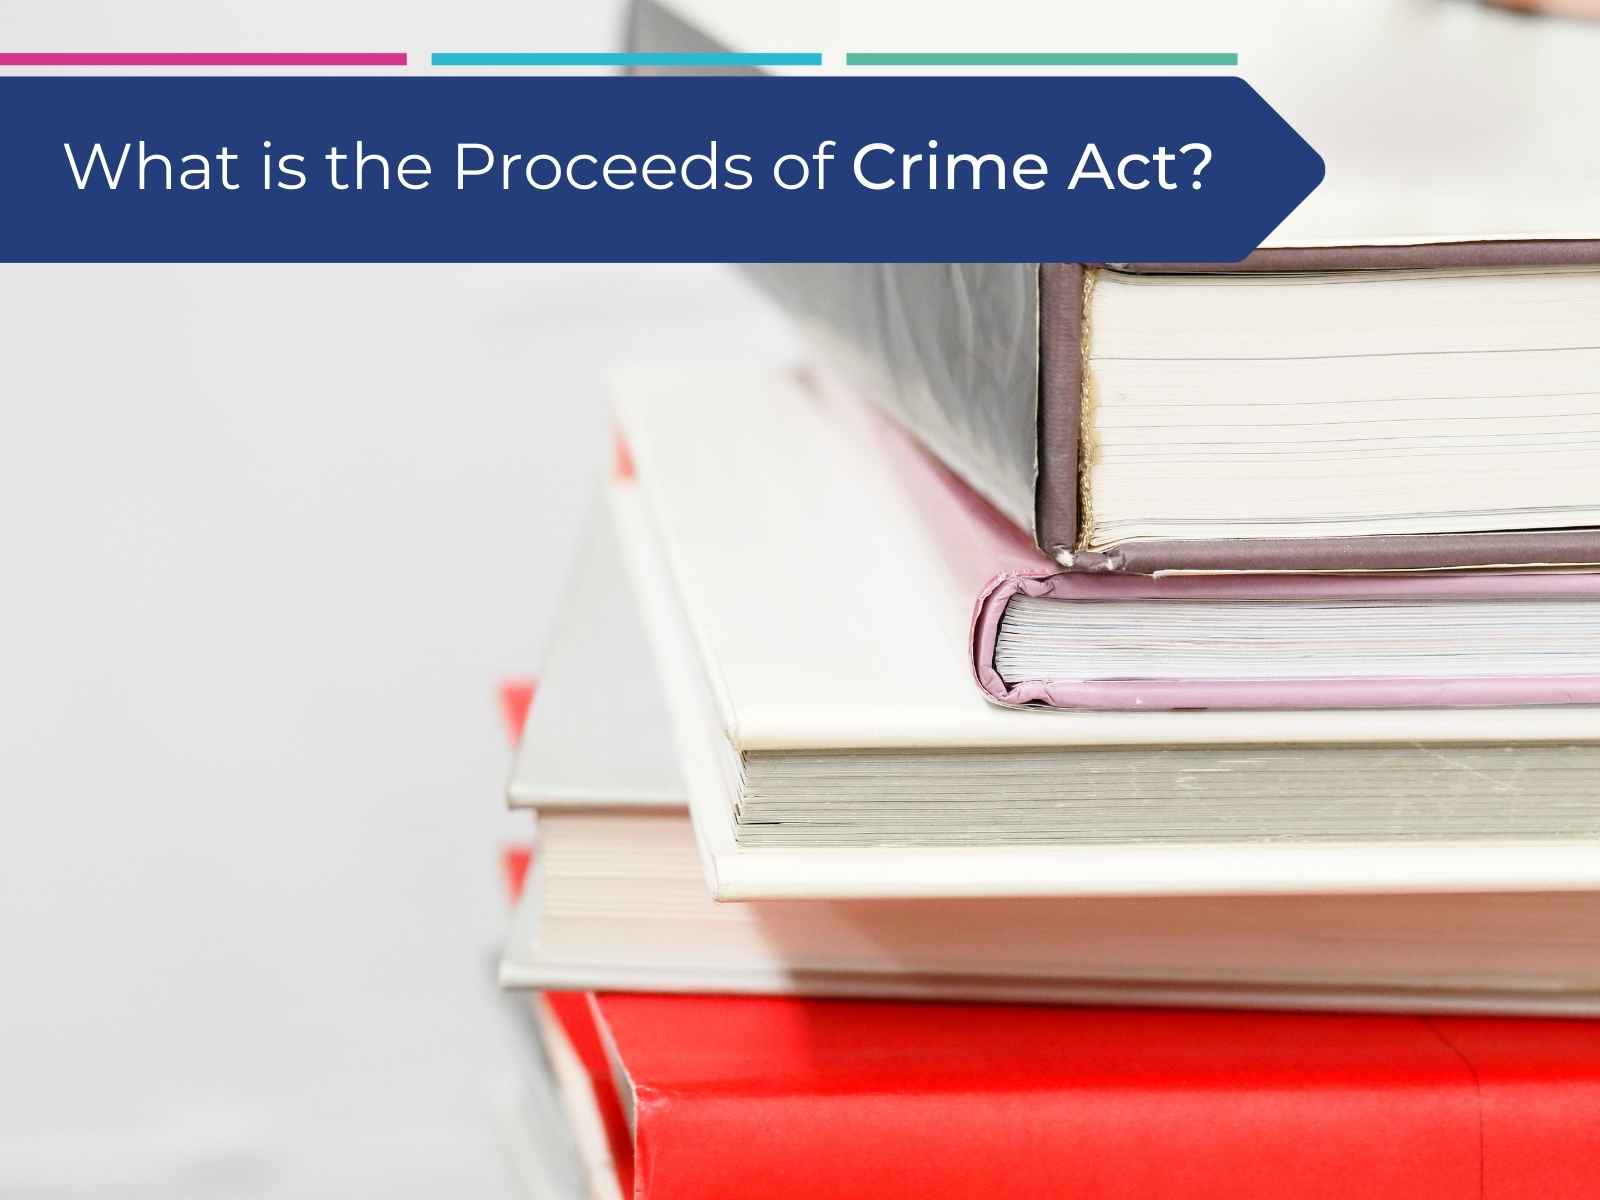 The Proceeds of Crime Act